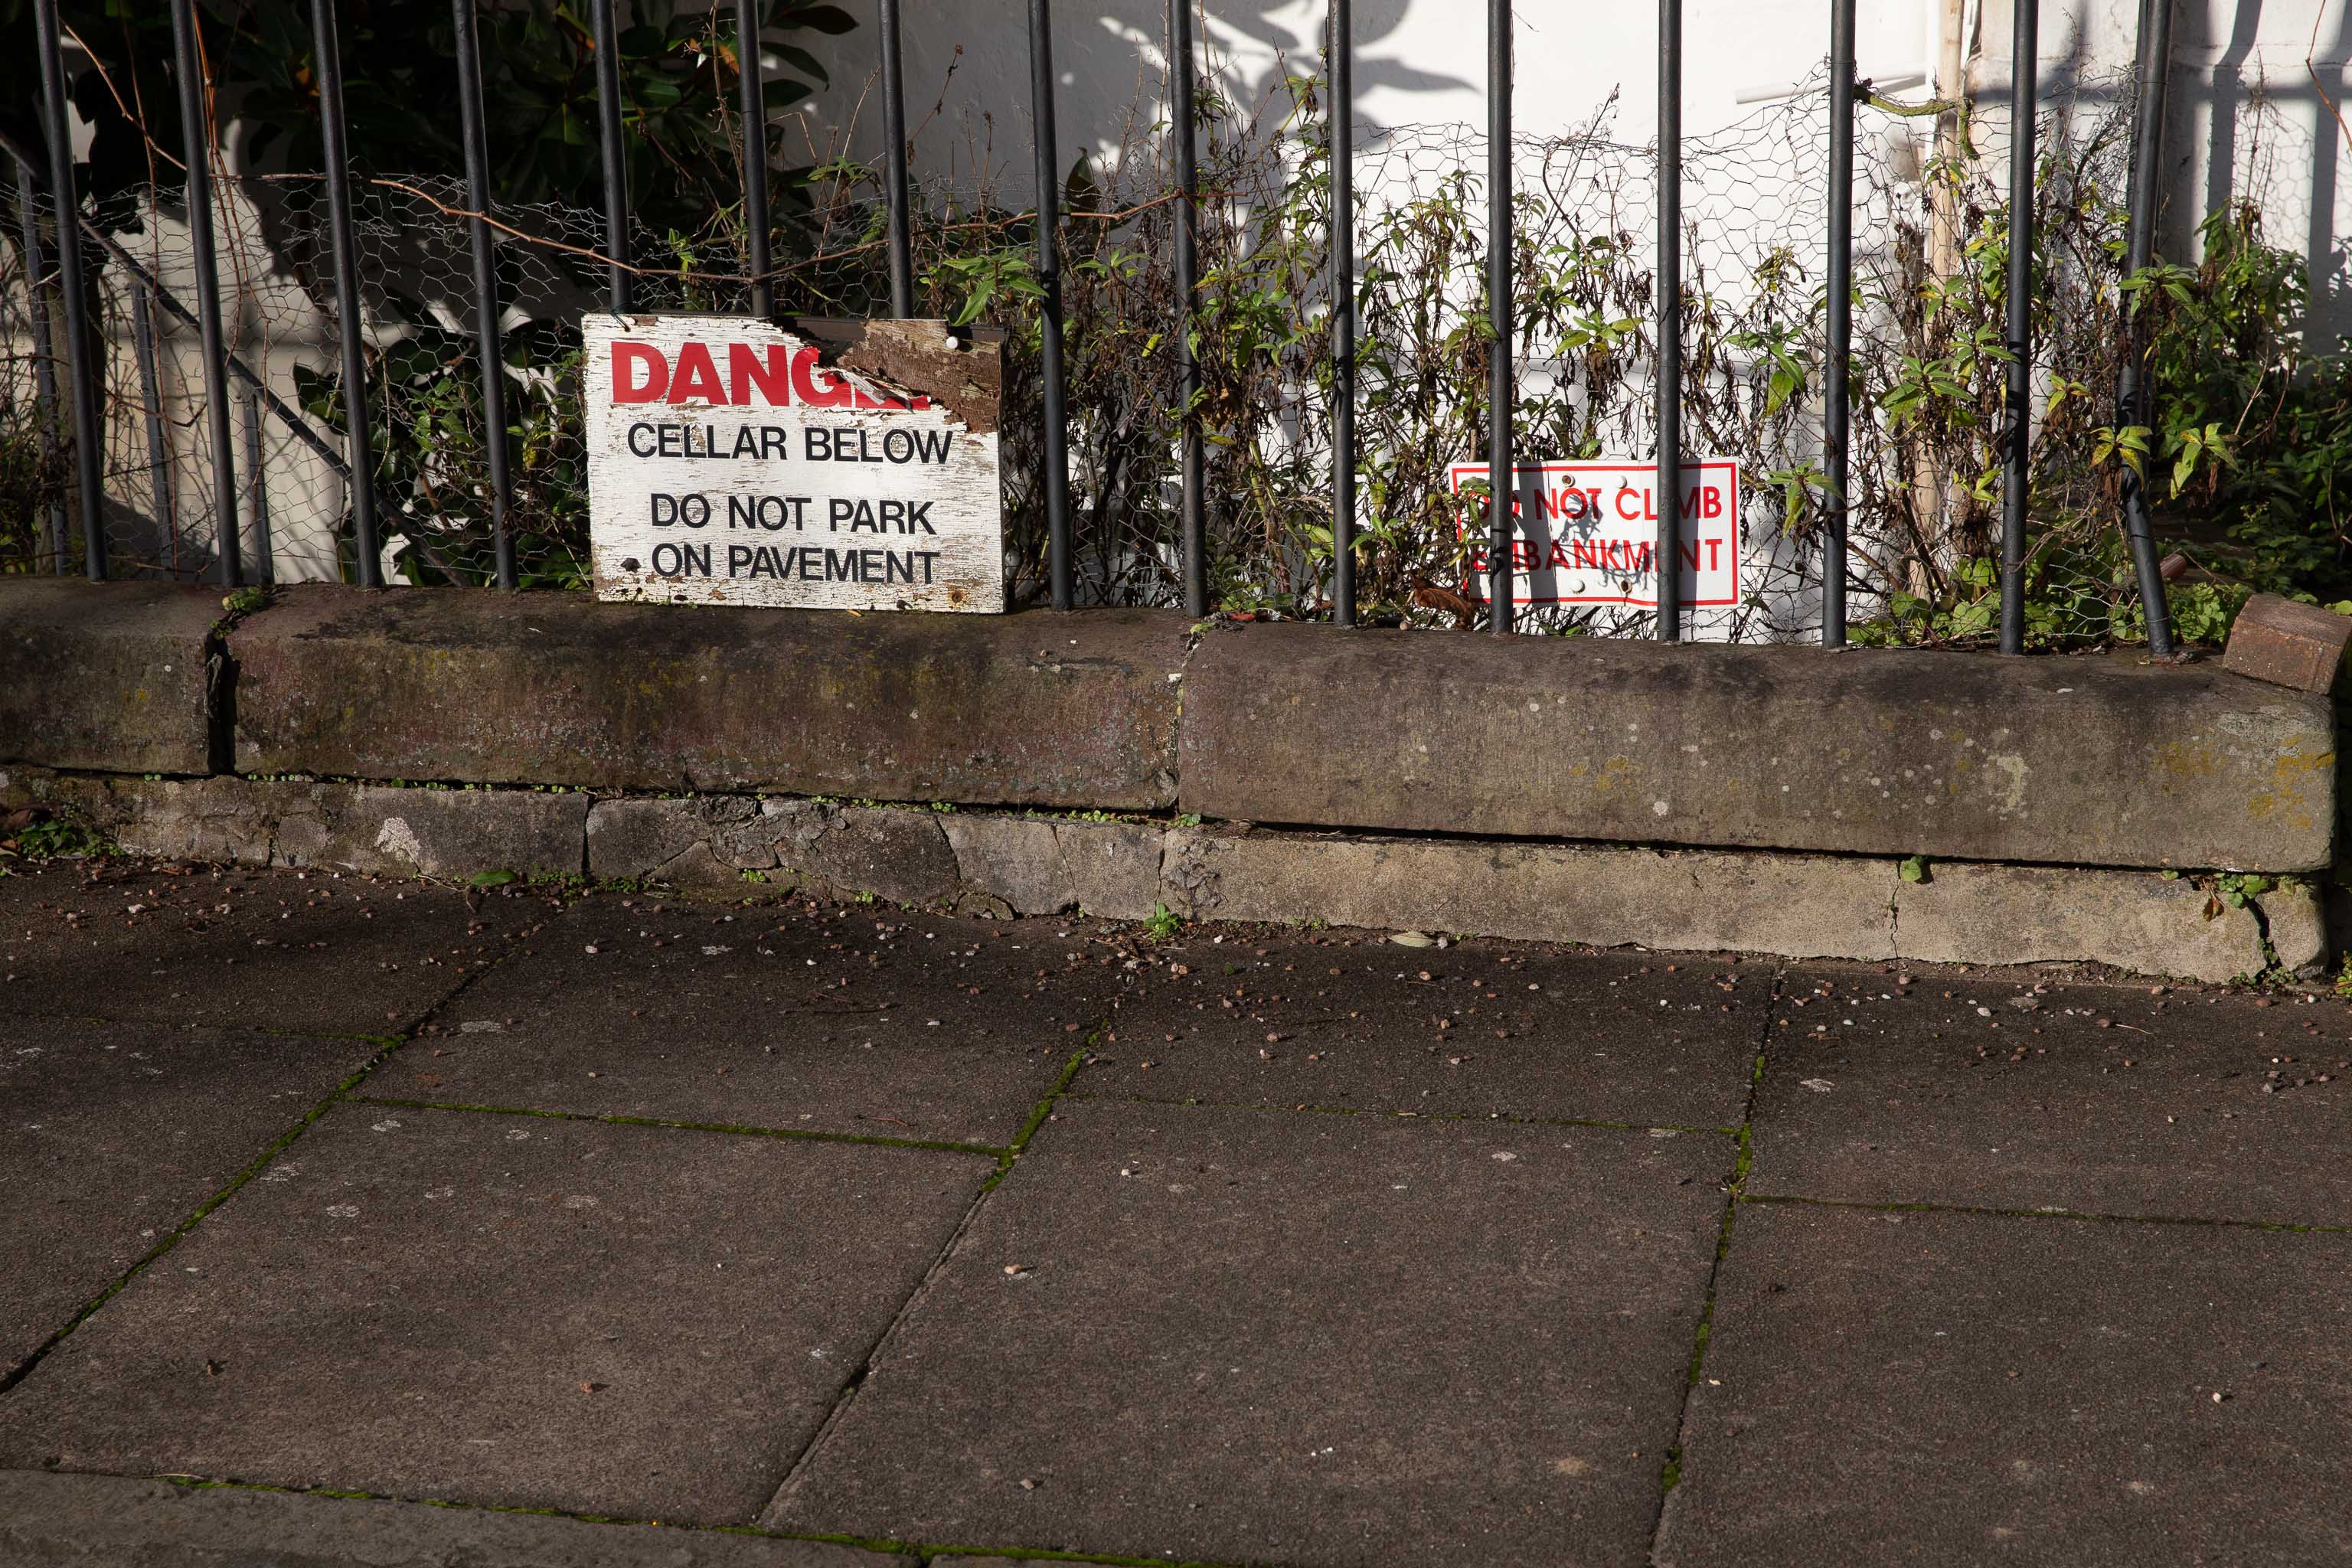 Danger
A month after I took this picture, a 40-foot sinkhole opened up inside the square's garden, along the edge of this side of the square, apparently i...